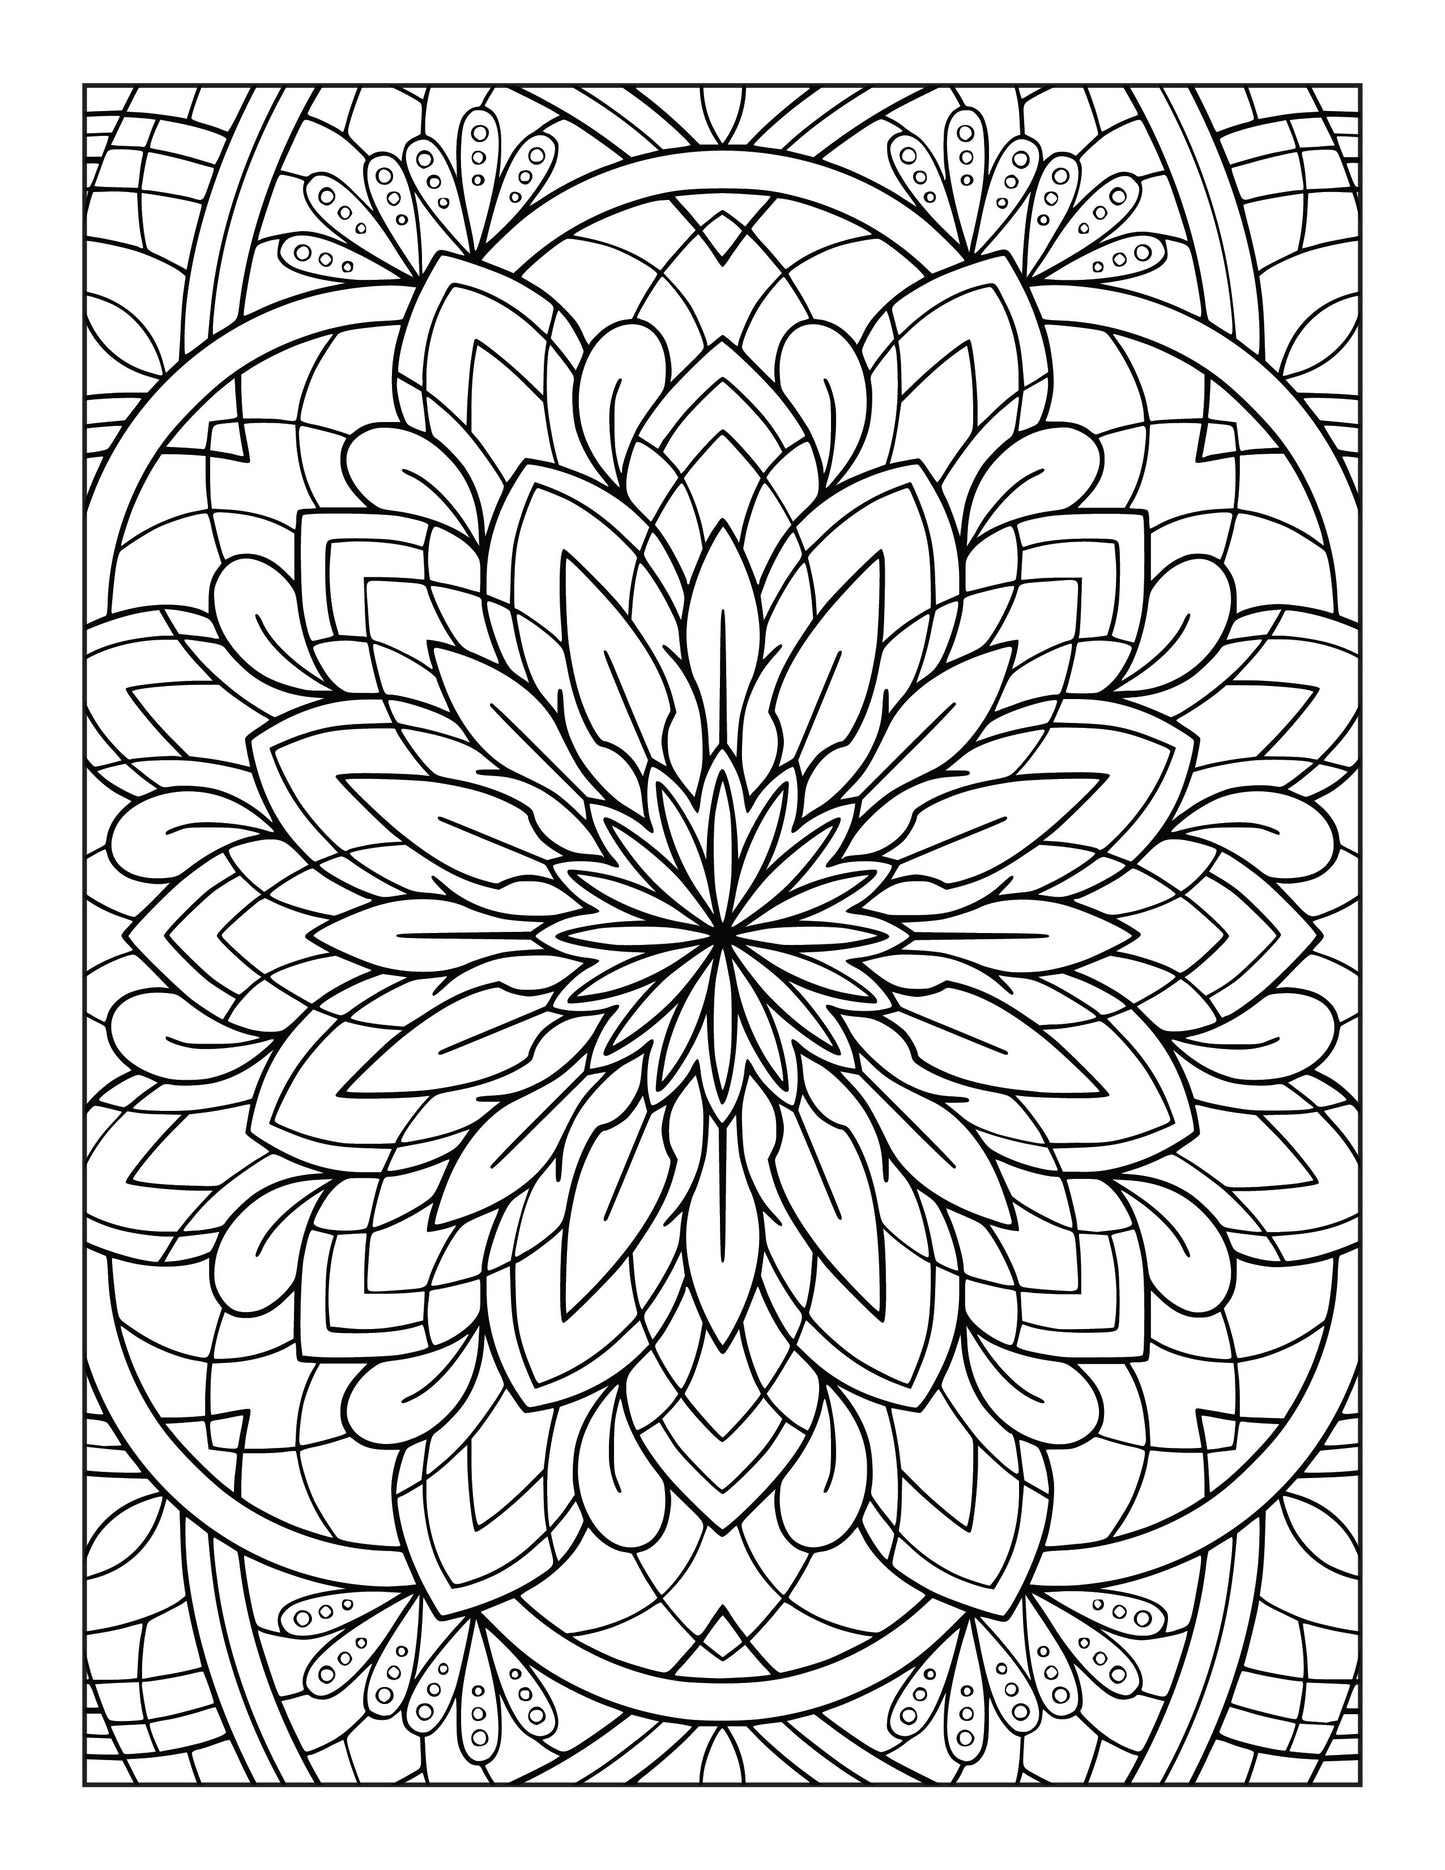 60 Free Mandala Adult Coloring Pages Printable PDF Instant Download